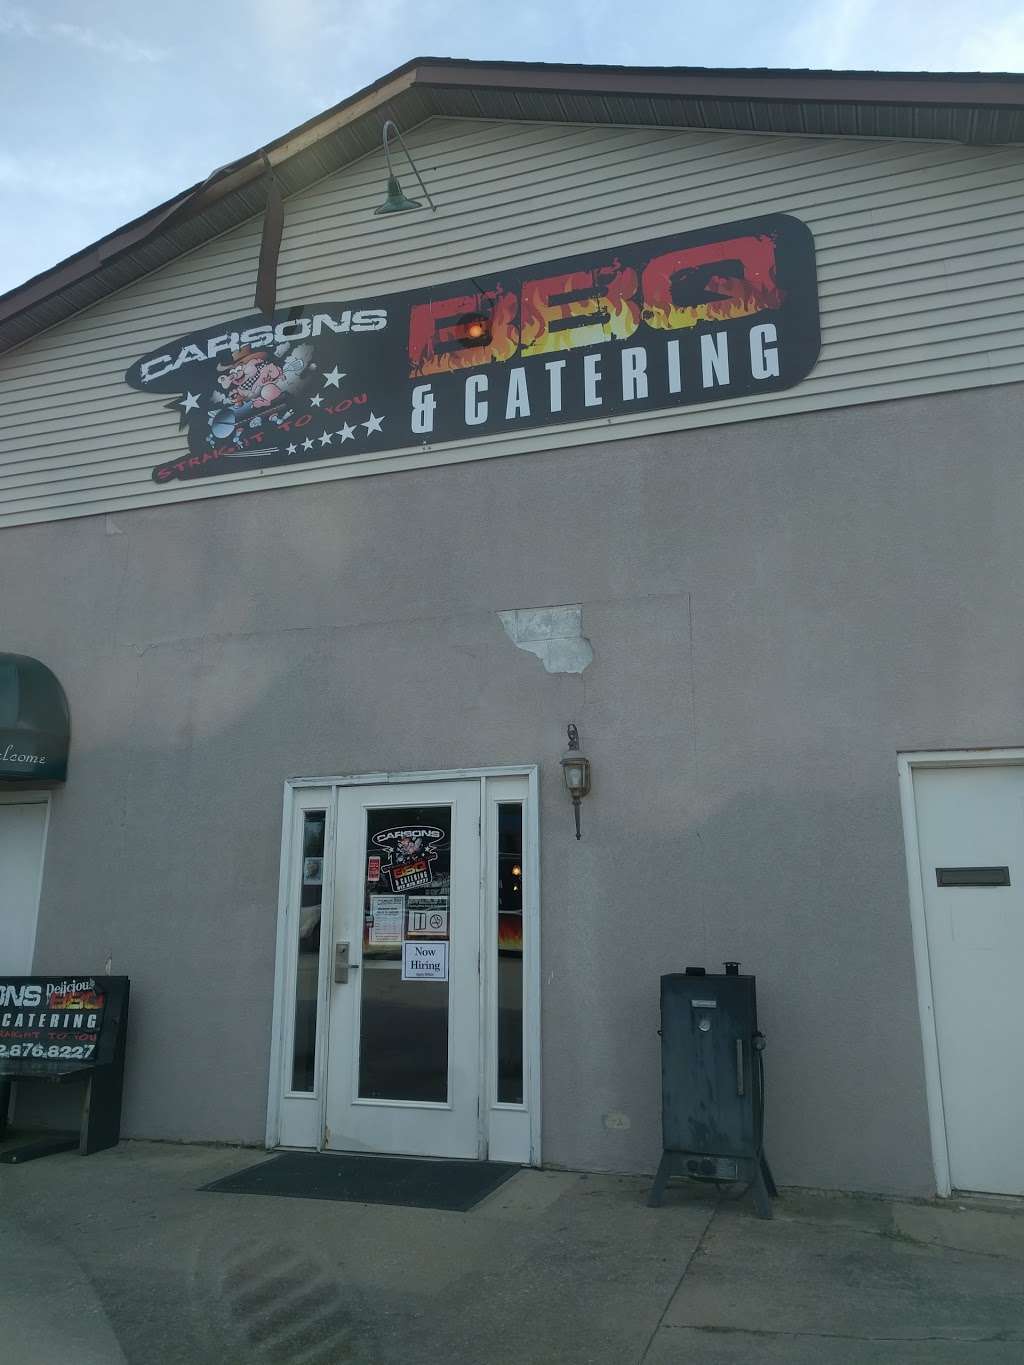 Carsons BBQ & Catering | 3878 W 3rd St, Bloomington, IN 47401 | Phone: (812) 369-4449